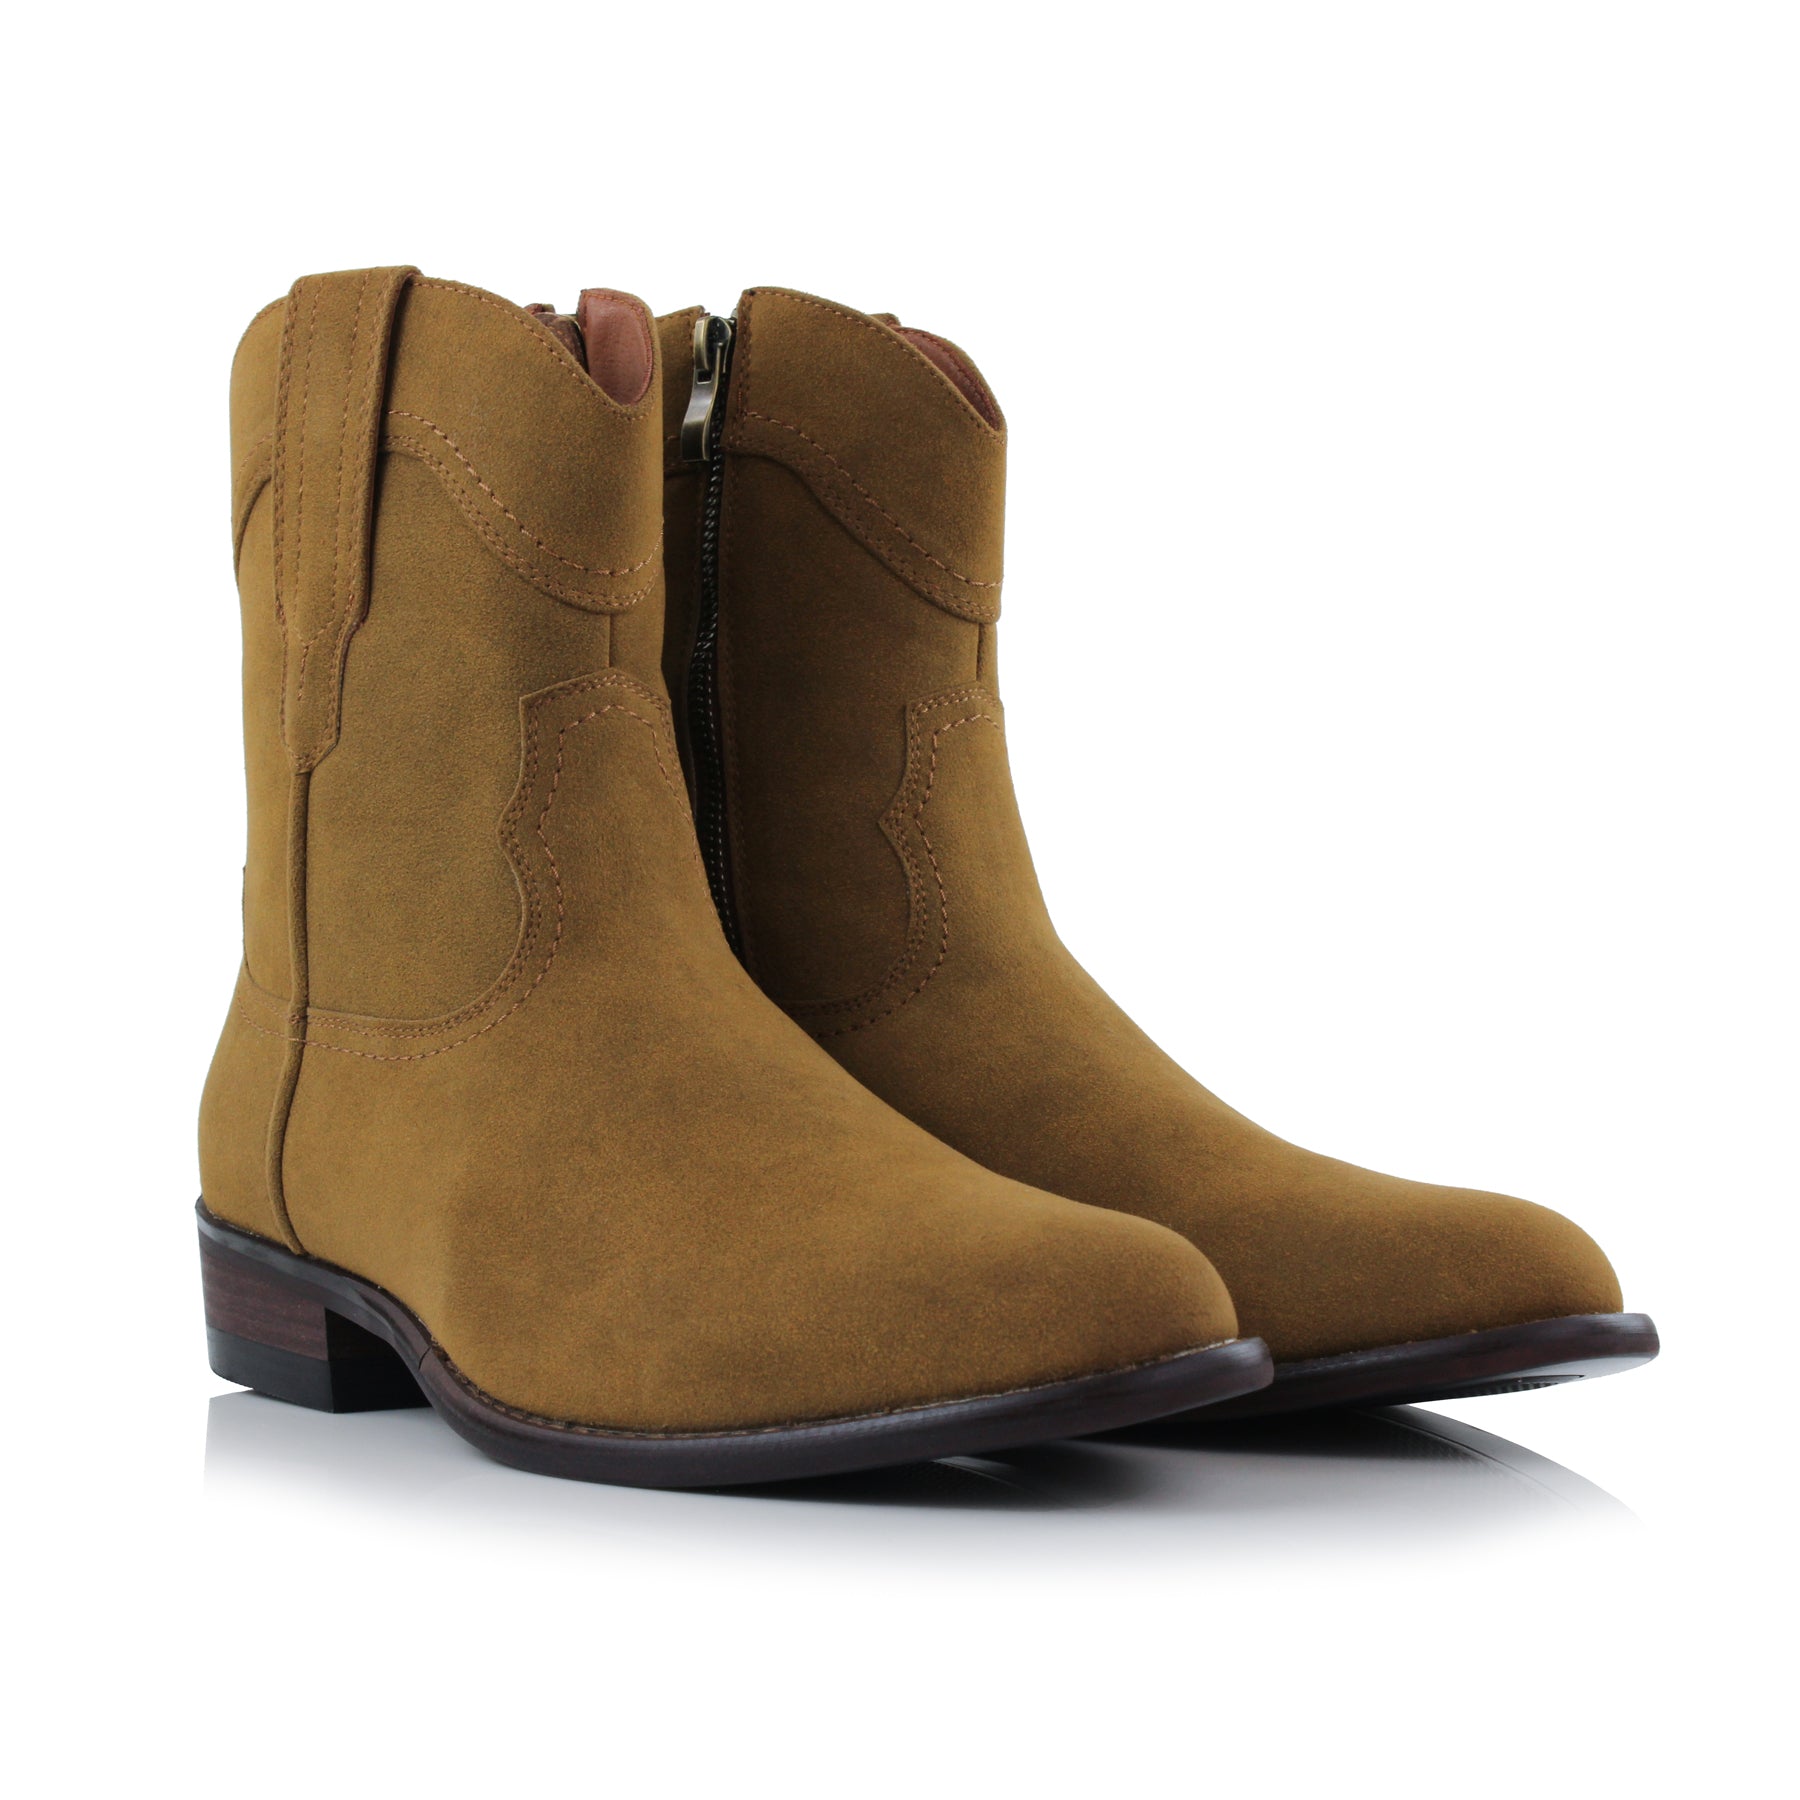 Men's Suede Western Boots | Austin by Ferro Aldo | Conal Footwear | Paired Angle View